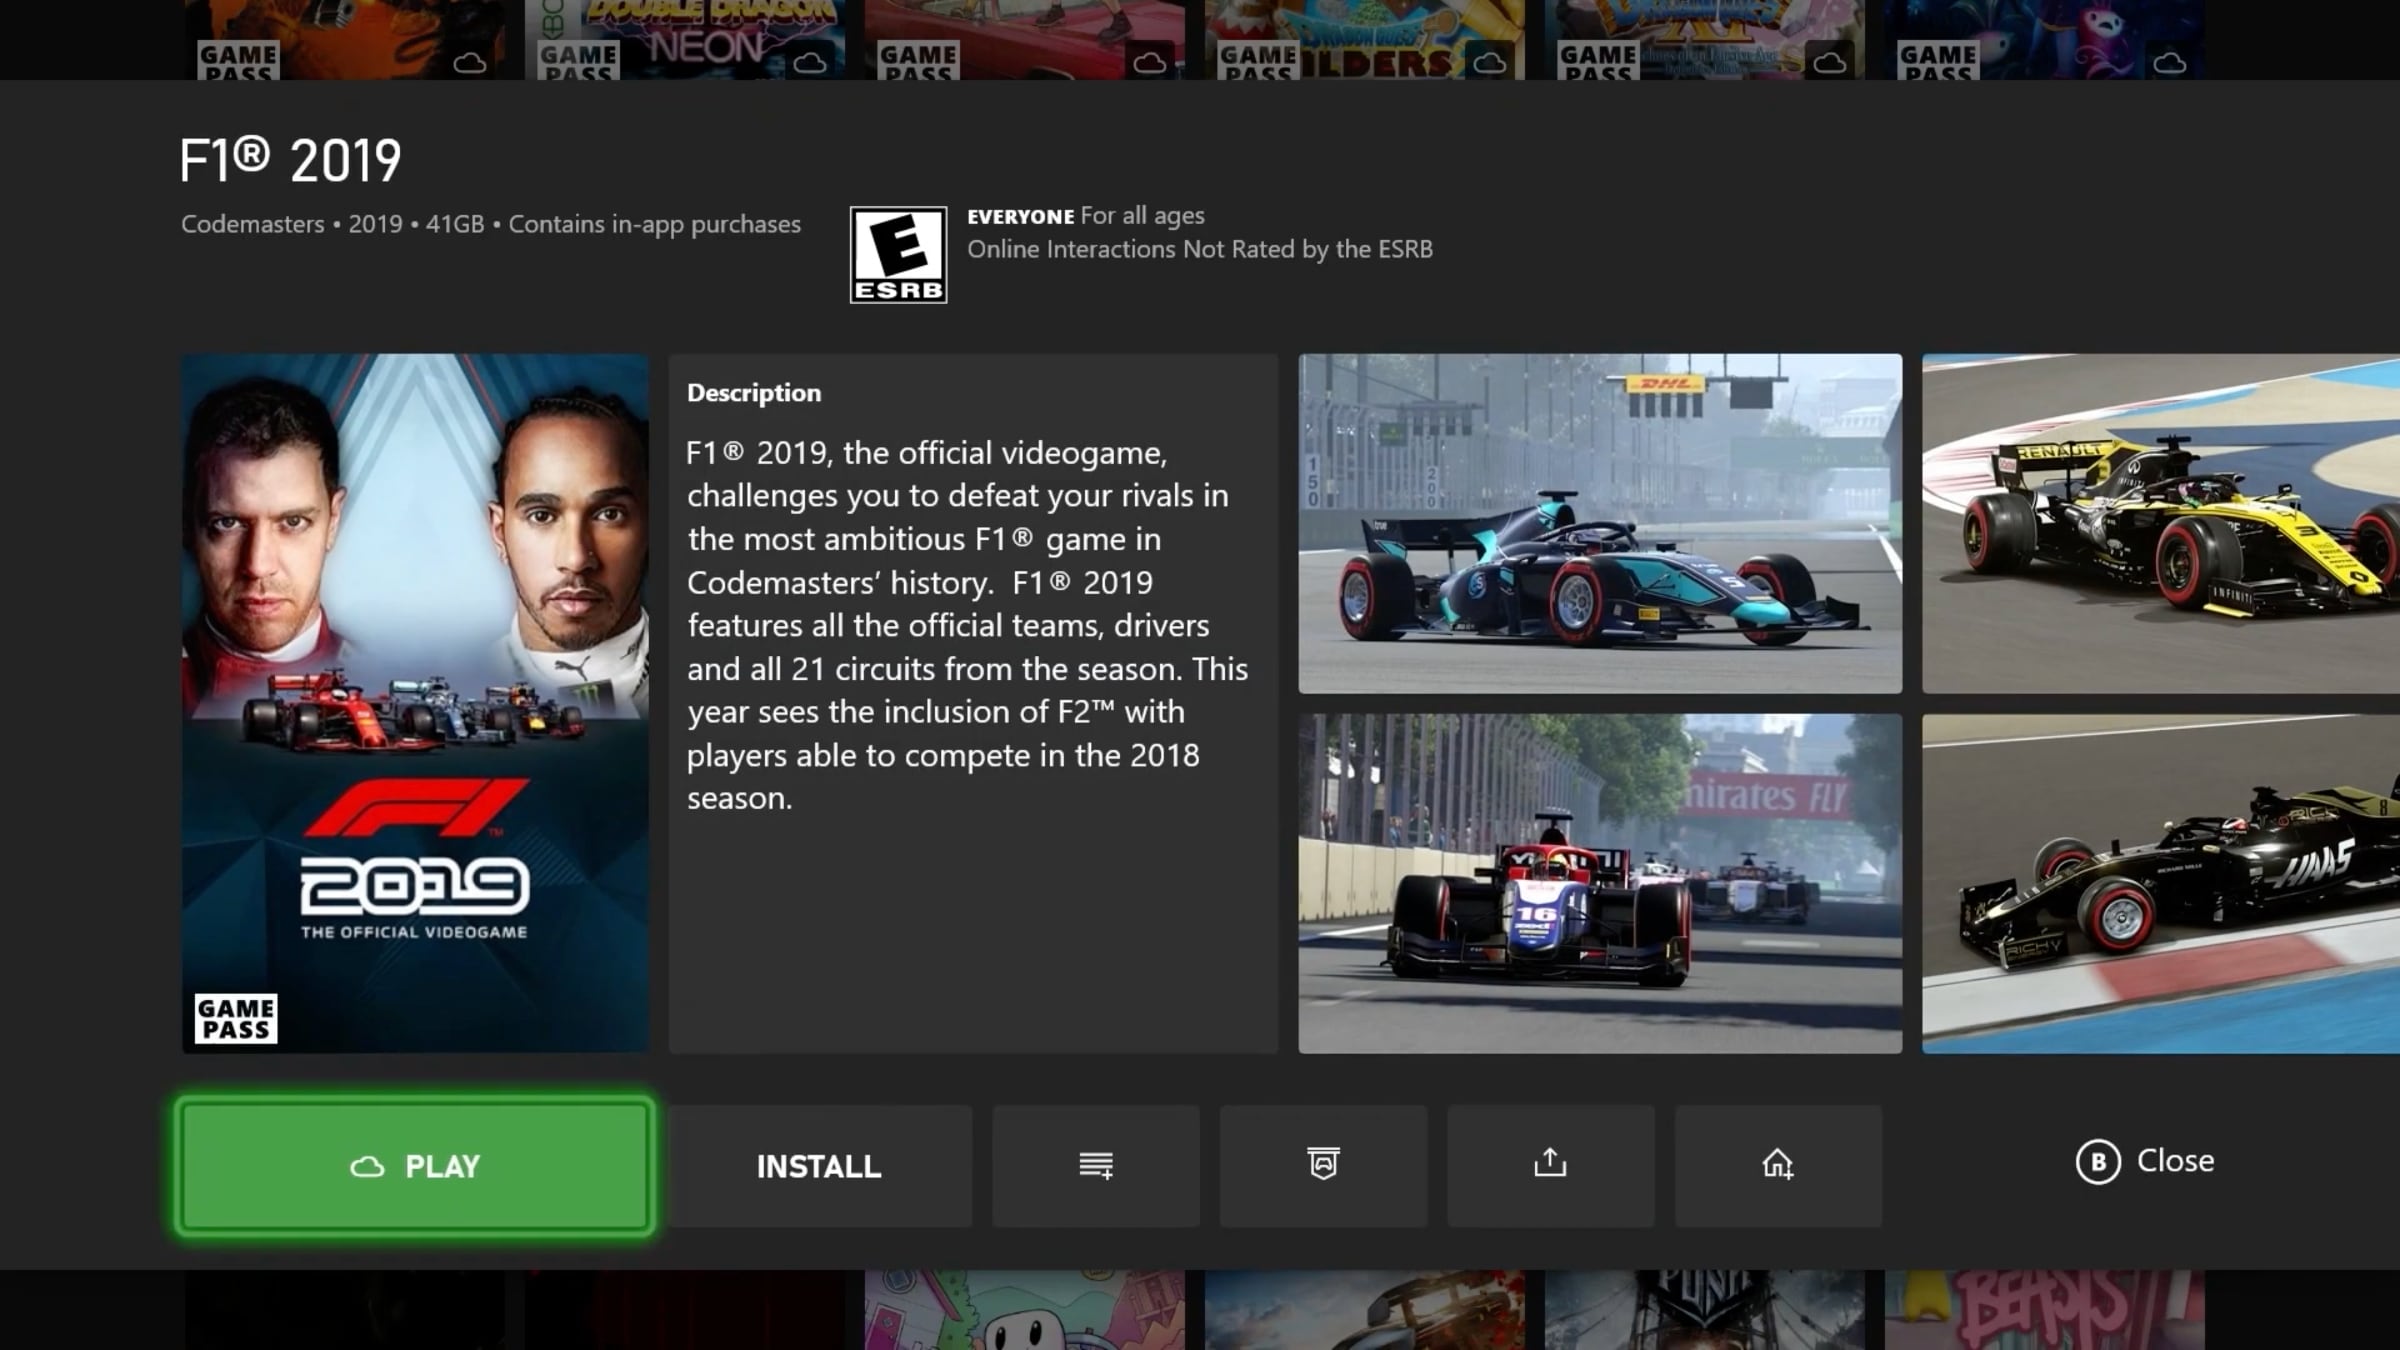 Xbox Cloud Gaming is finally rolling out big latency improvements